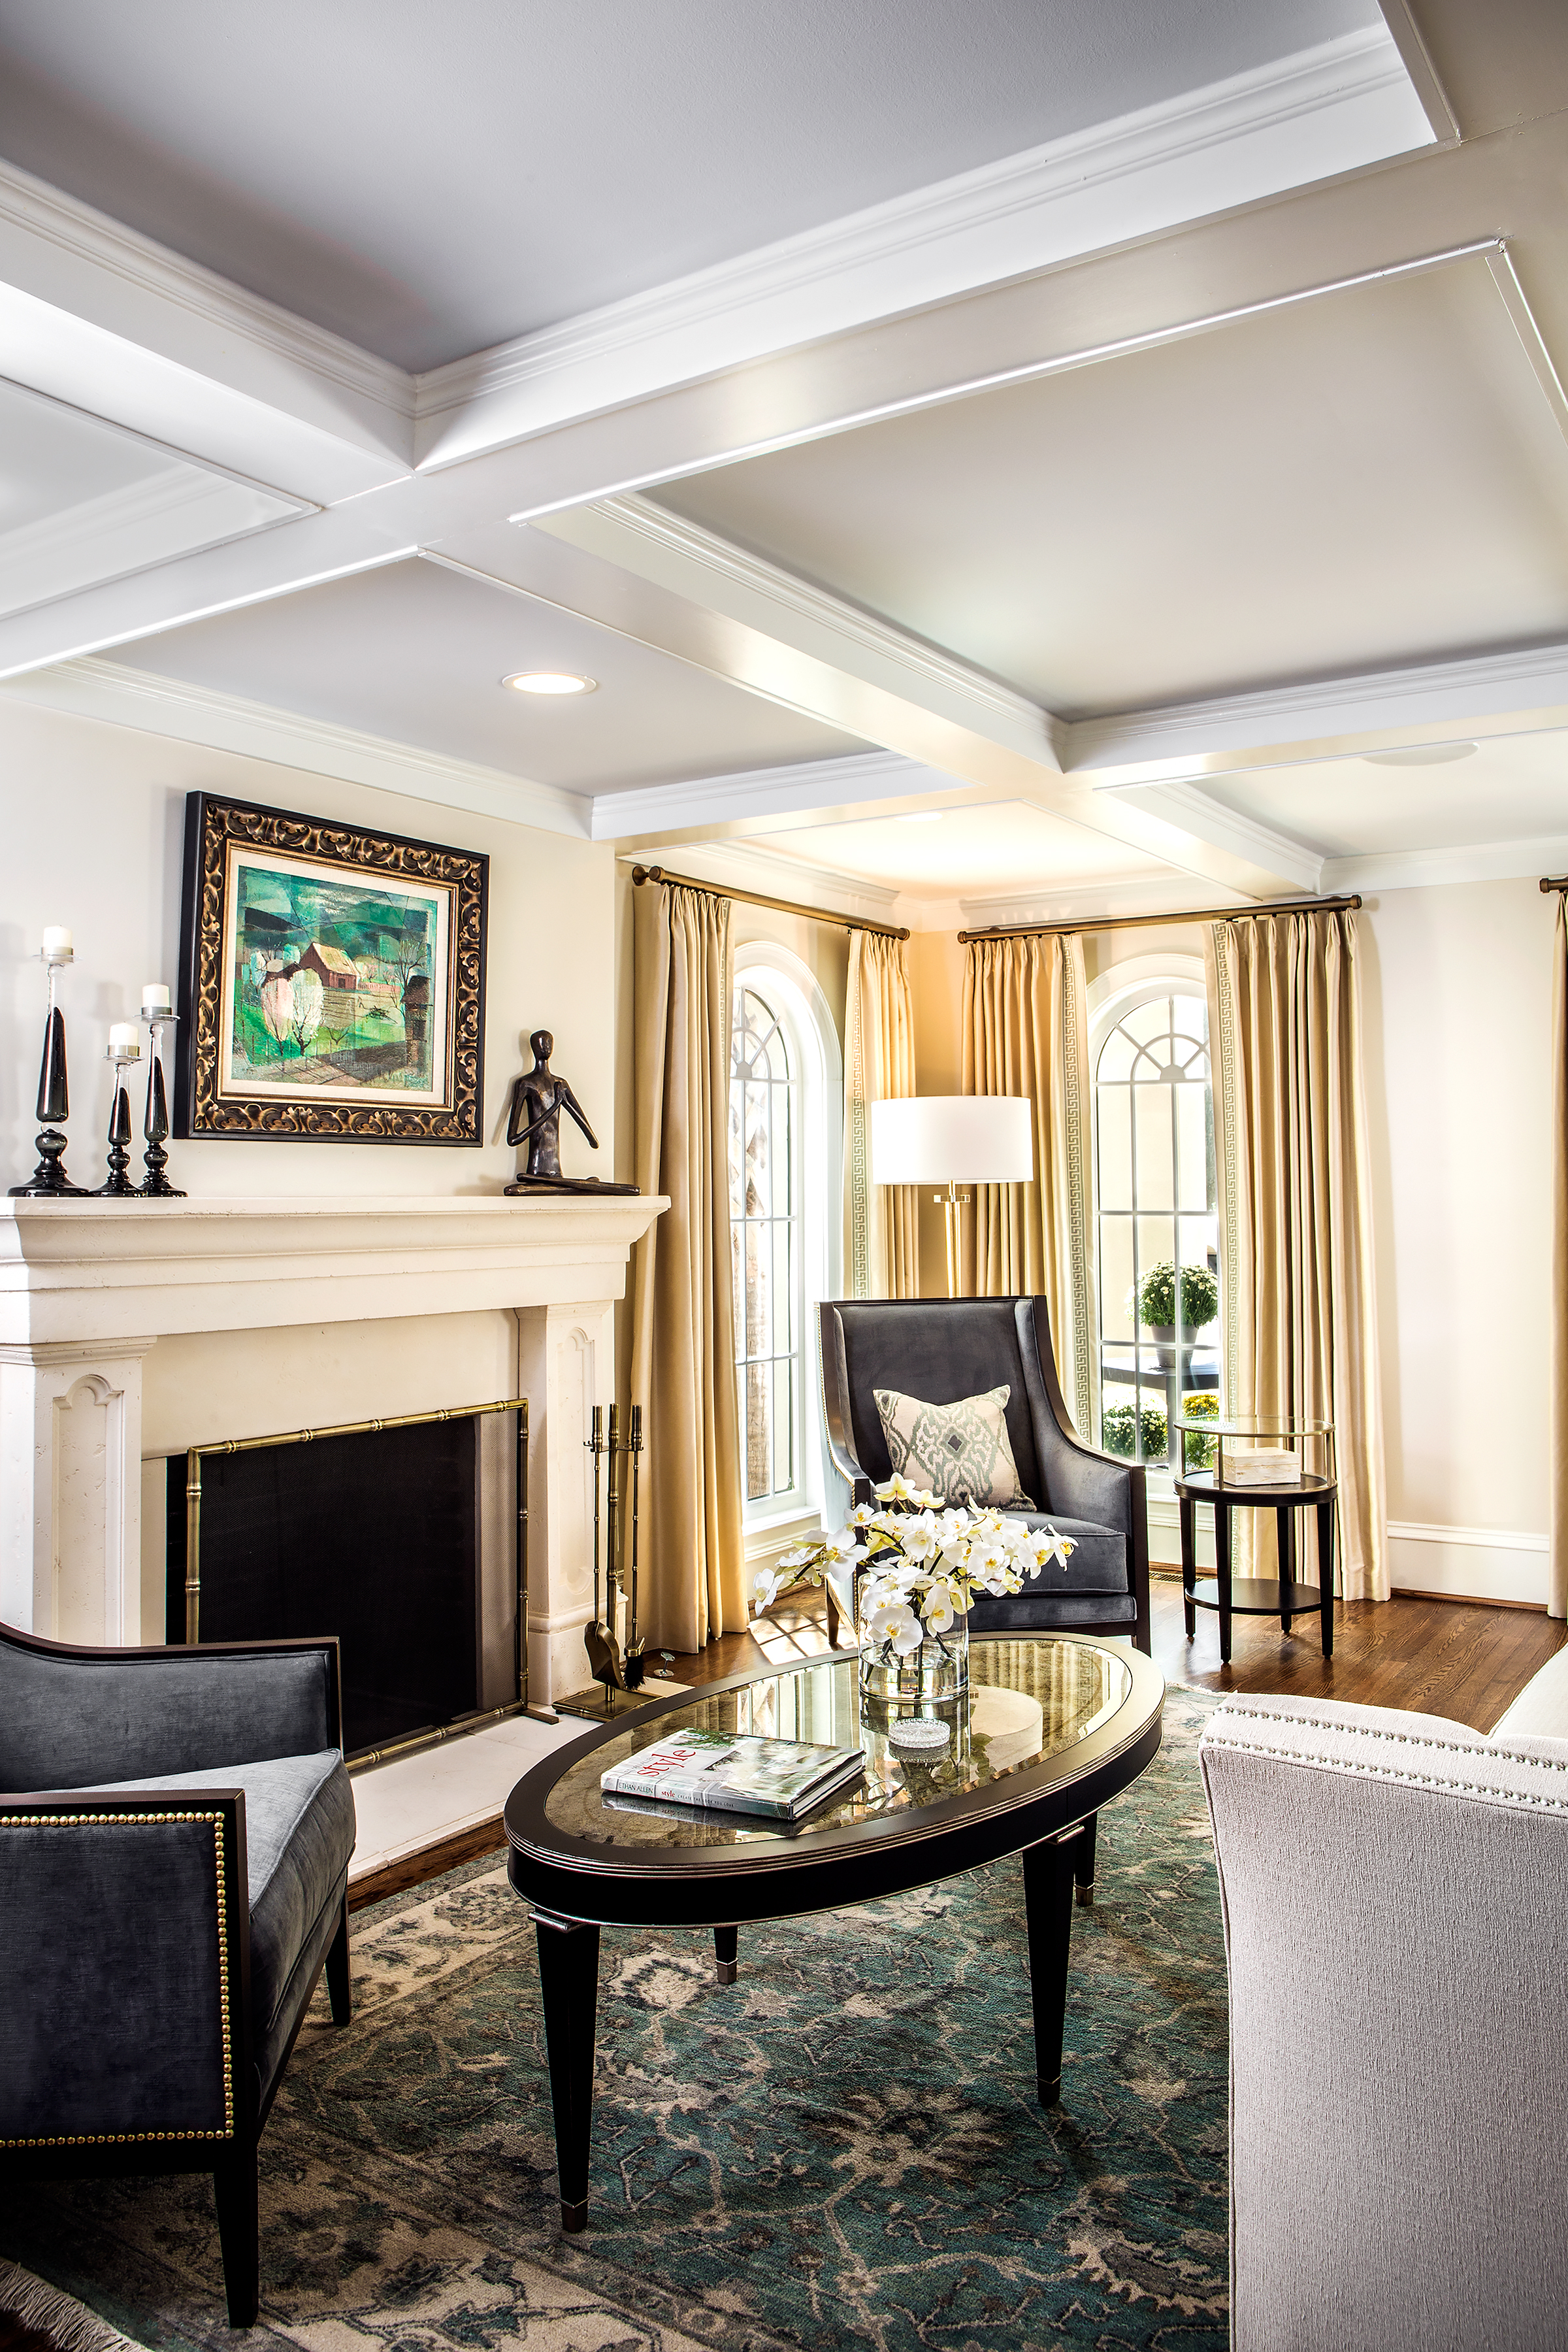 The coffered ceiling in the living room architecturally defines the space, and the gracious arched windows purchased by Brenda eight years ago are beautifully incorporated into the renovation.